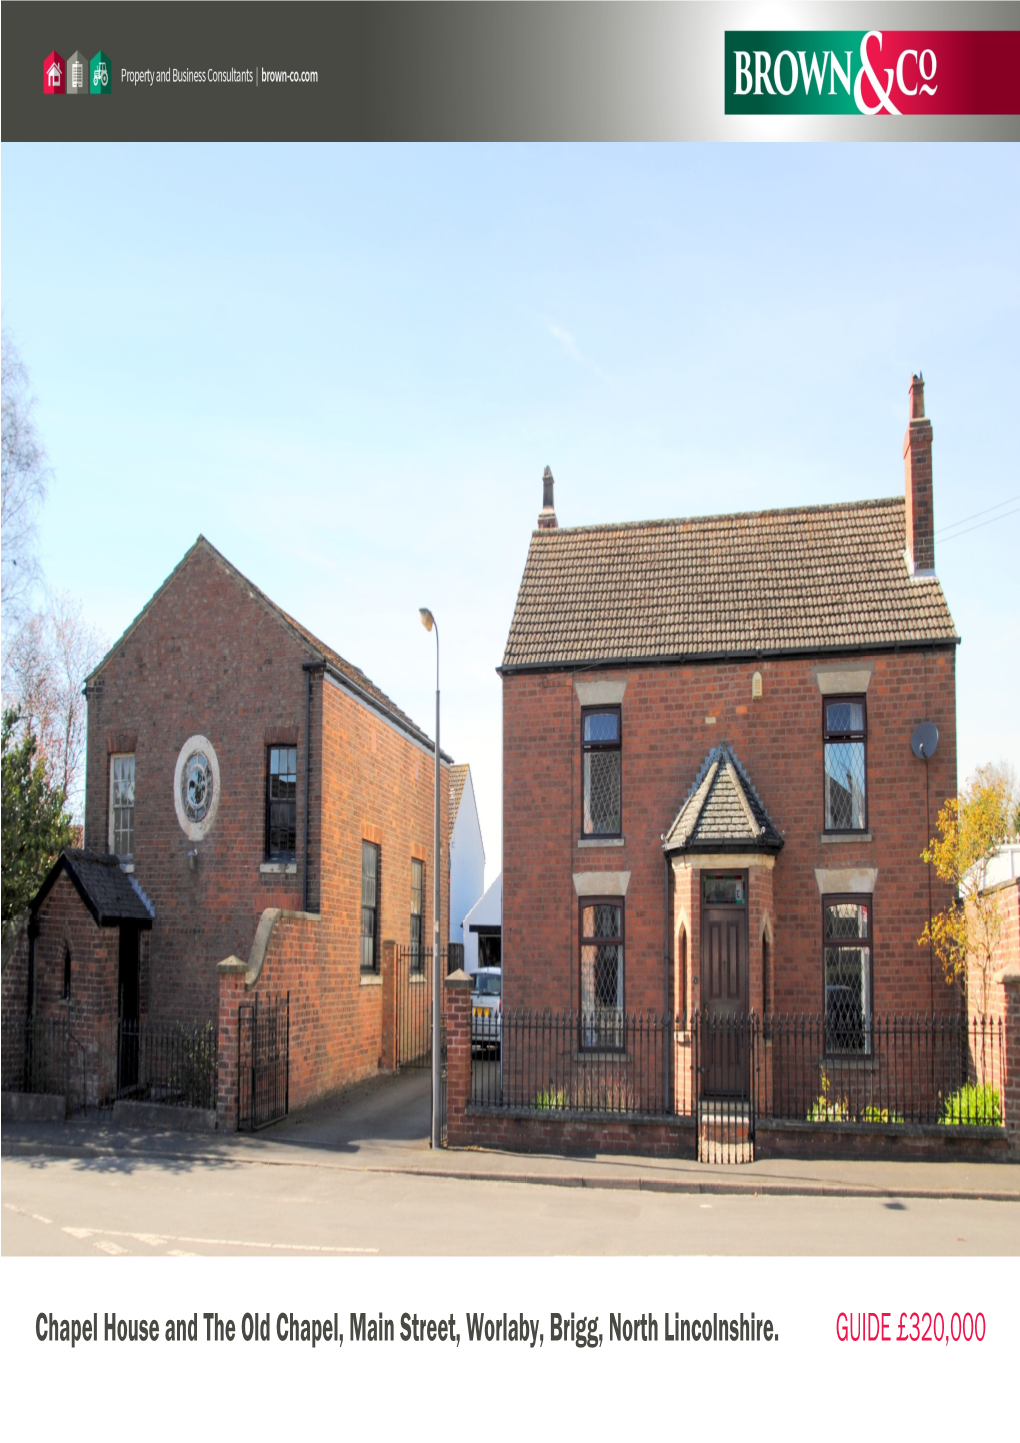 Chapel House and the Old Chapel, Main Street, Worlaby, Brigg, North Lincolnshire